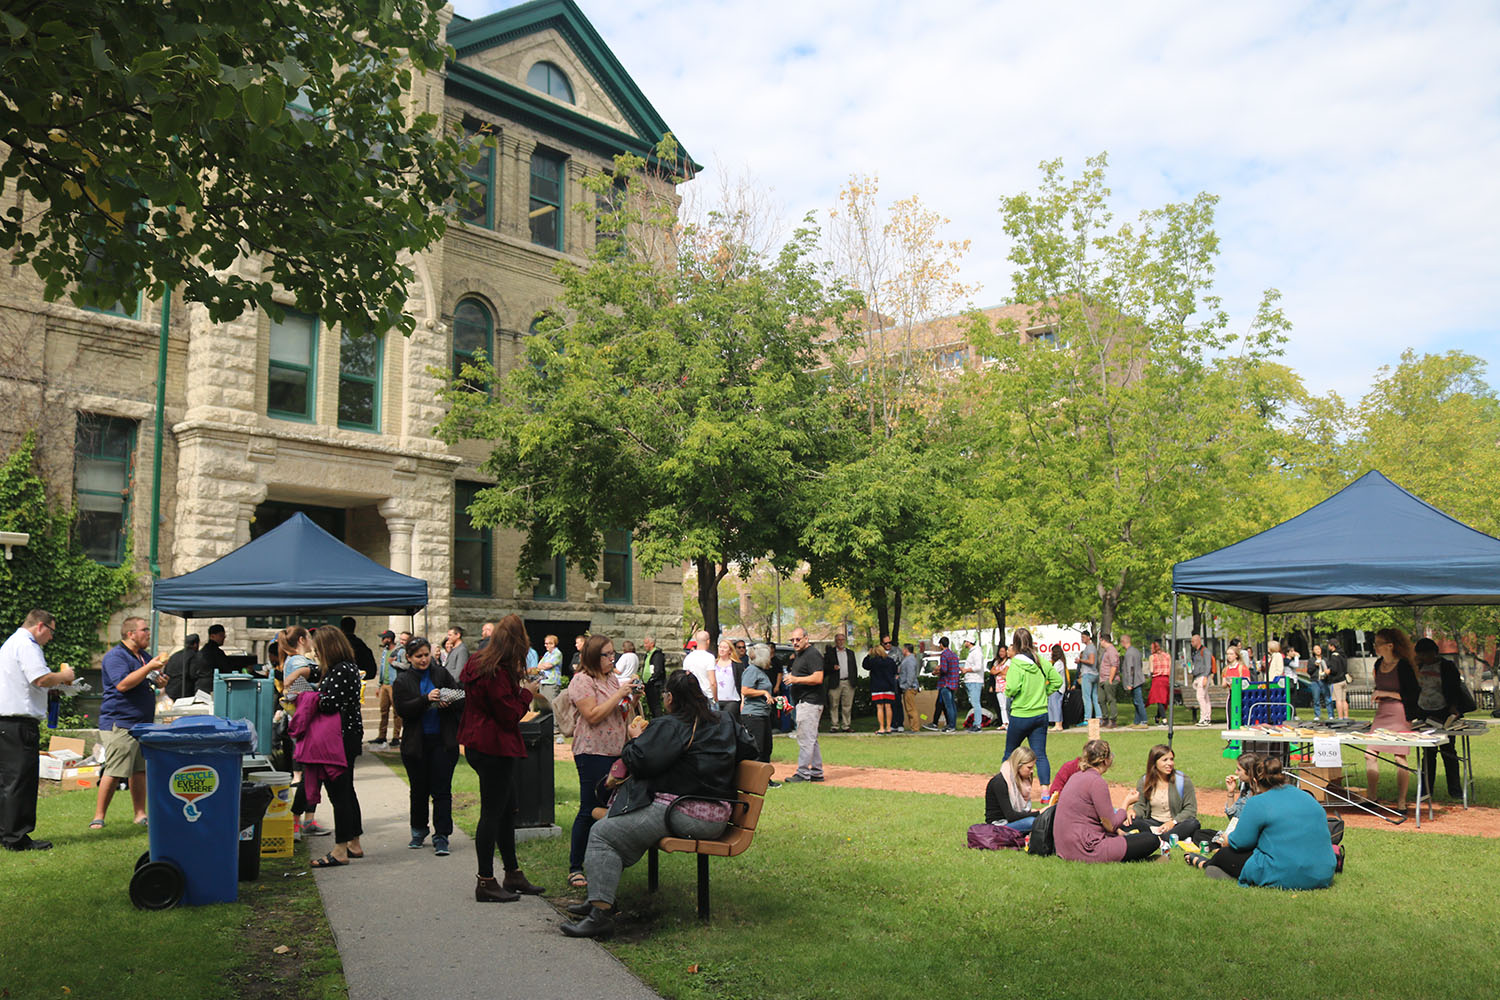 Students and staff gather for an event on the campus lawn.